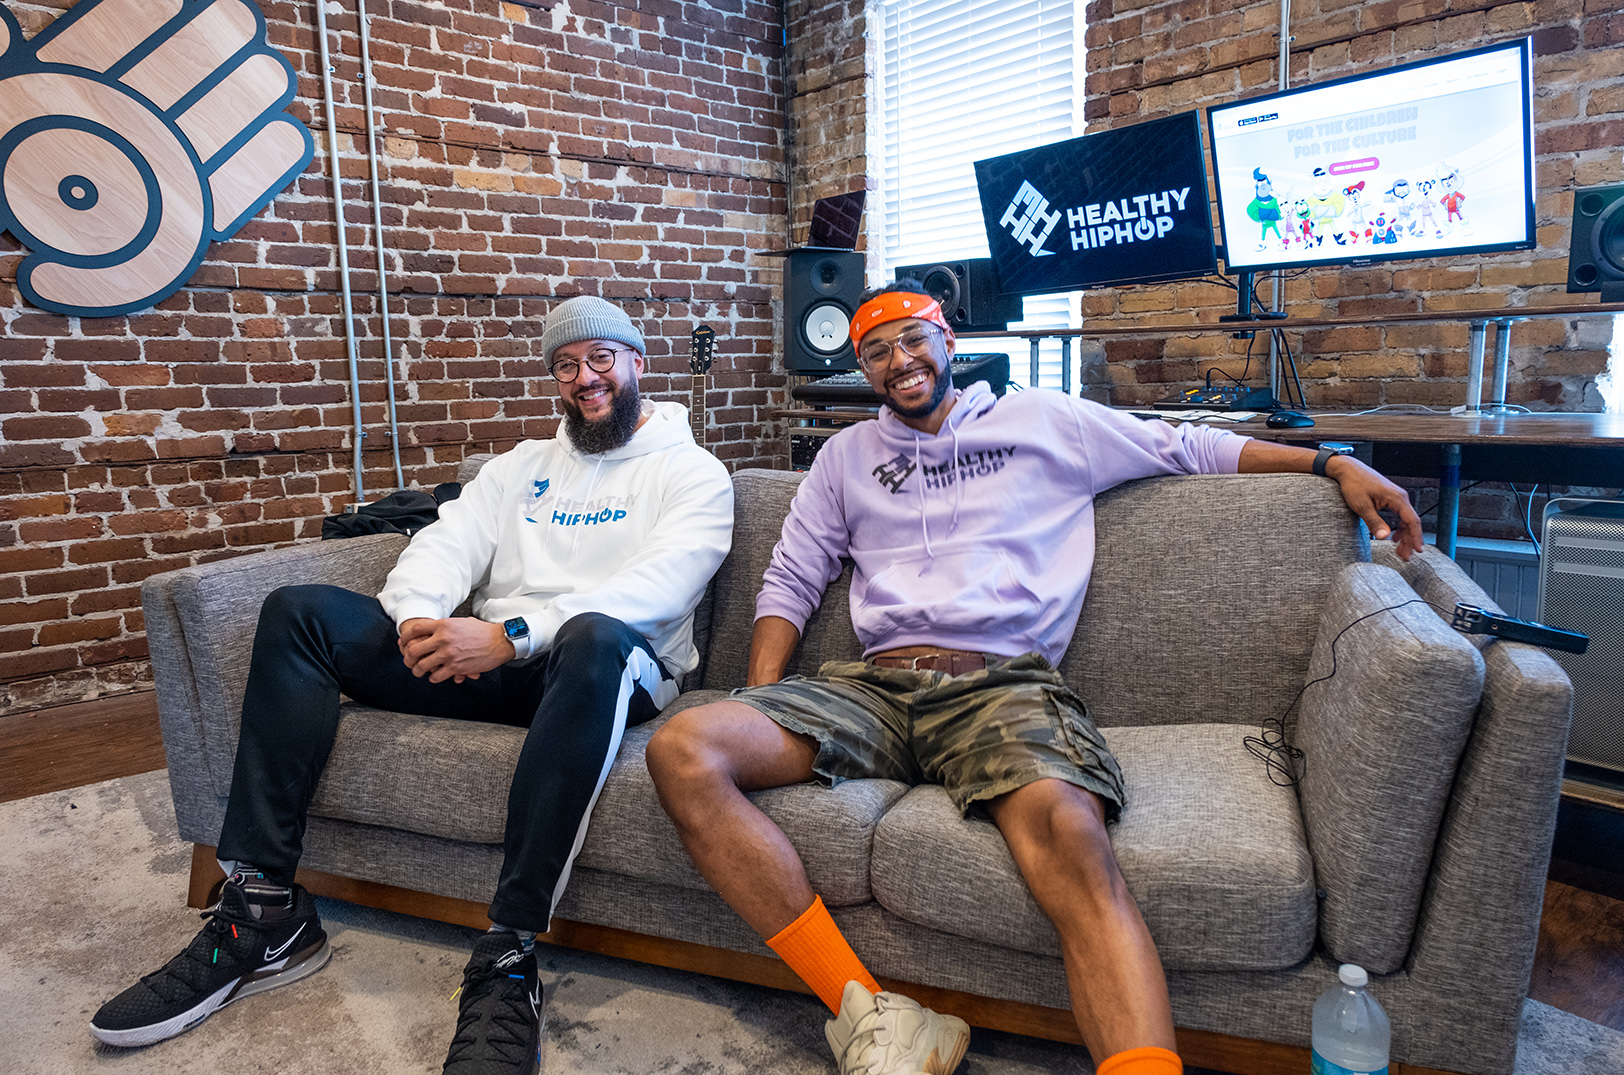 Exclusive: MaC Venture Capital, Michael B. Jordan Name Healthy Hip Hop As The Winner Of Legacy Classic Startup Pitch Competition